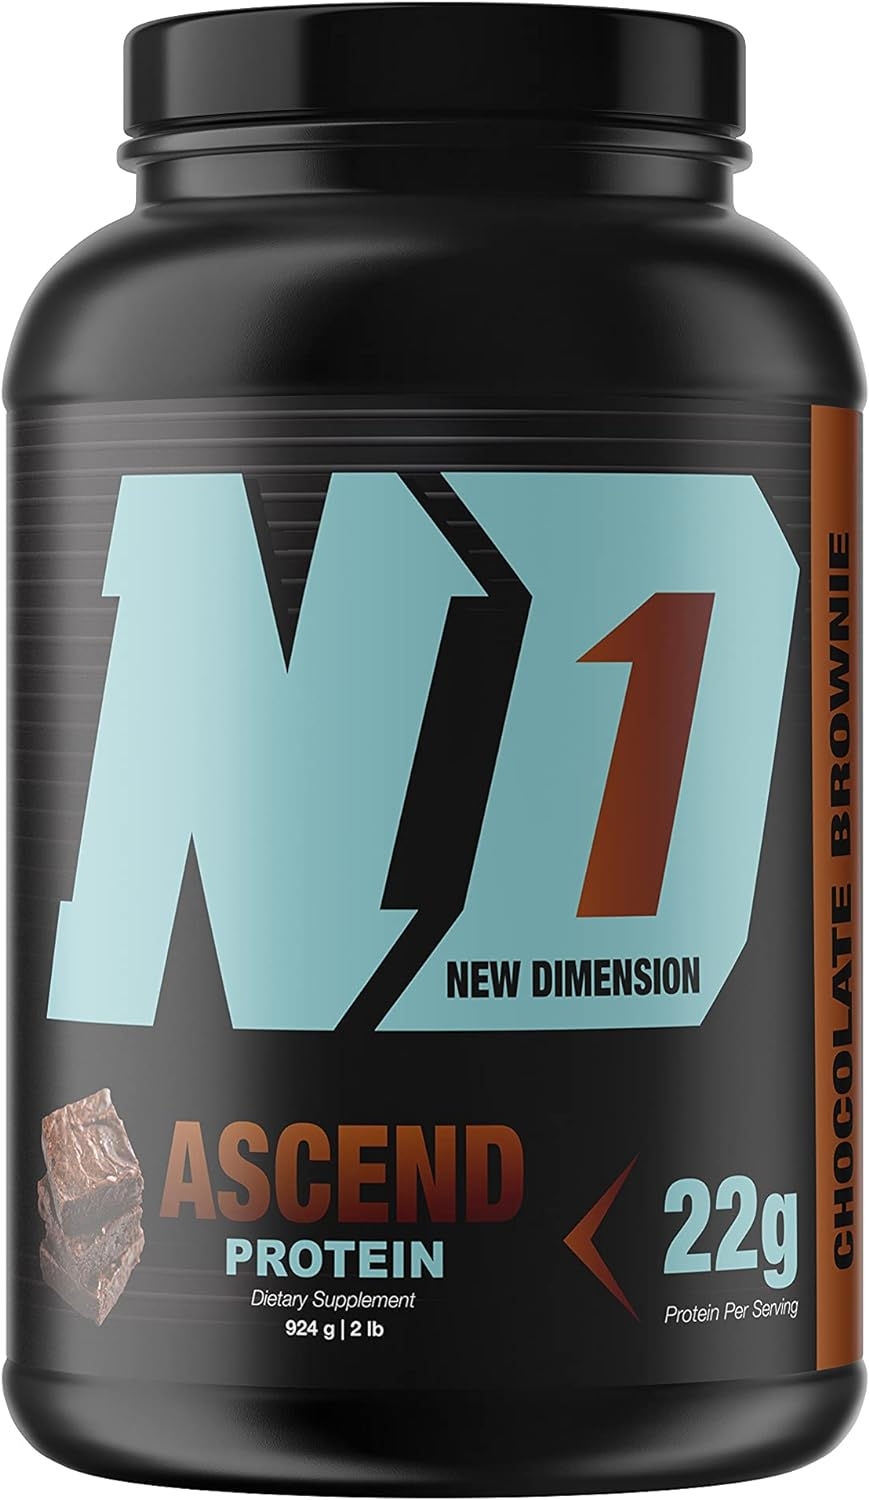 New Dimension Ascend Whey Protein Powder, Micellar Casein, Milk Protein Isolate | Chocolate Brownie | Protein Powder Matrix | Digestive Enzymes | Post Workout Drink | 2 LBs | 28 Servings